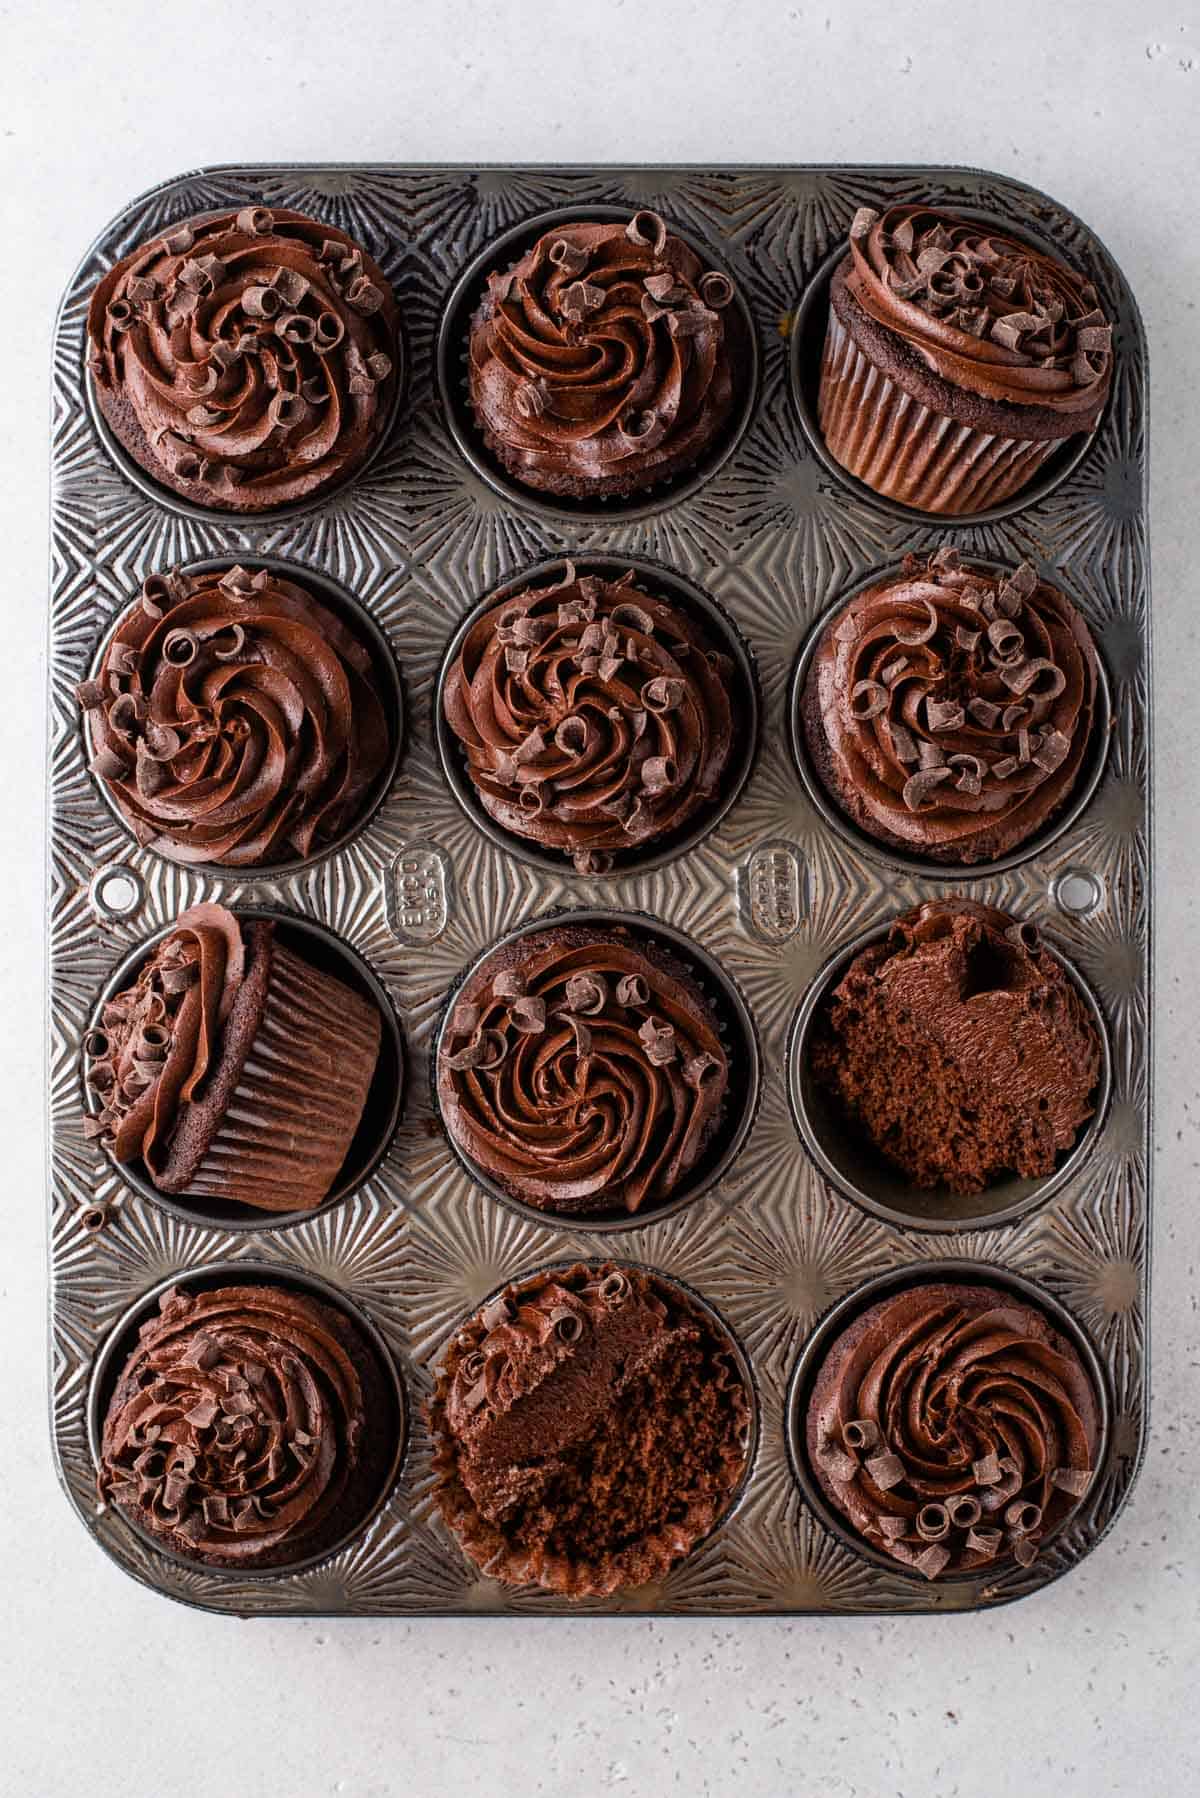 Frosted gluten-free chocolate cupcakes in muffin tin